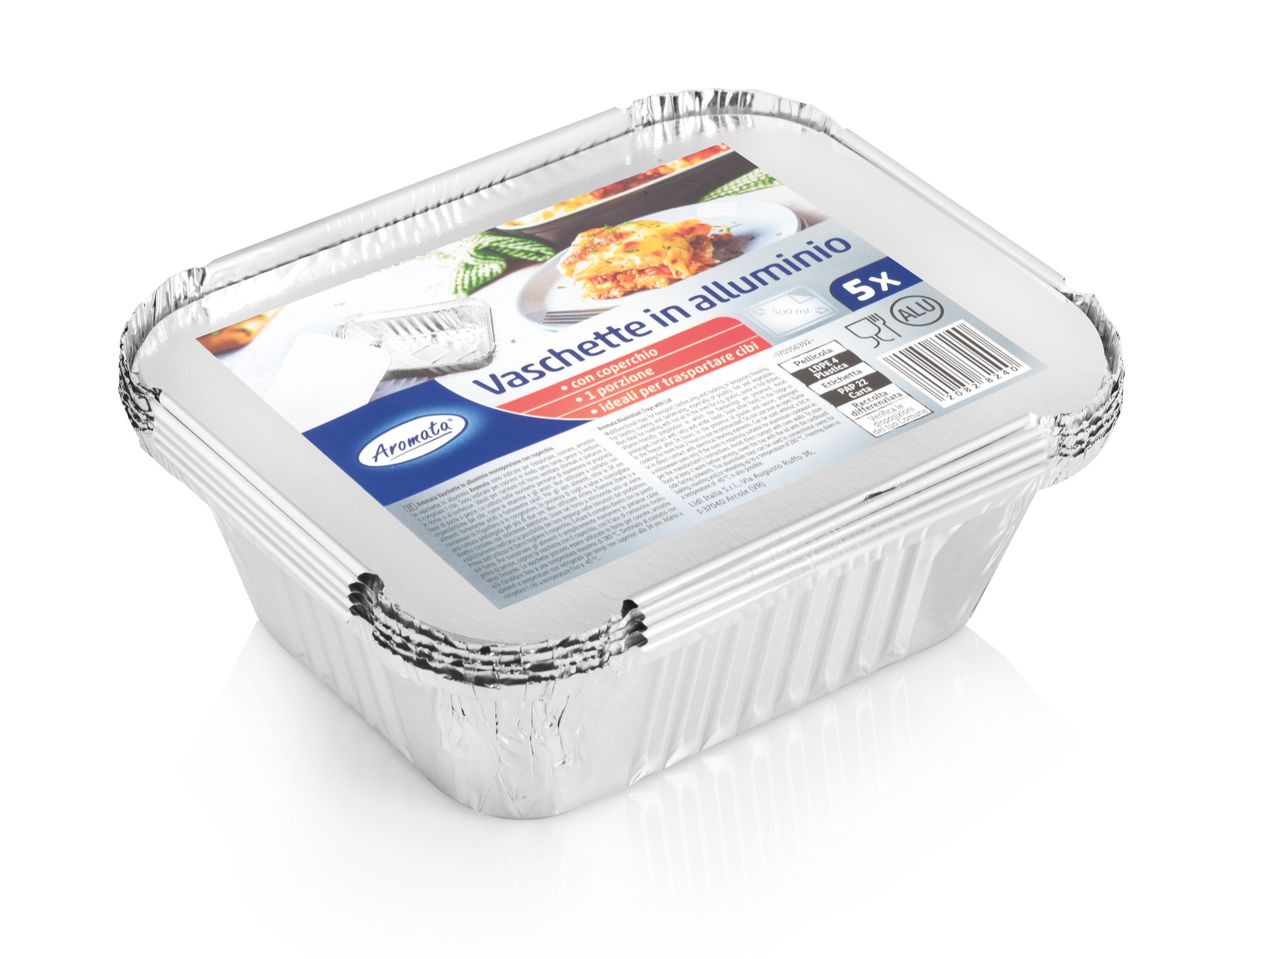 Go to full screen view: Aluminium Foil Tray Small with Lid - Image 1